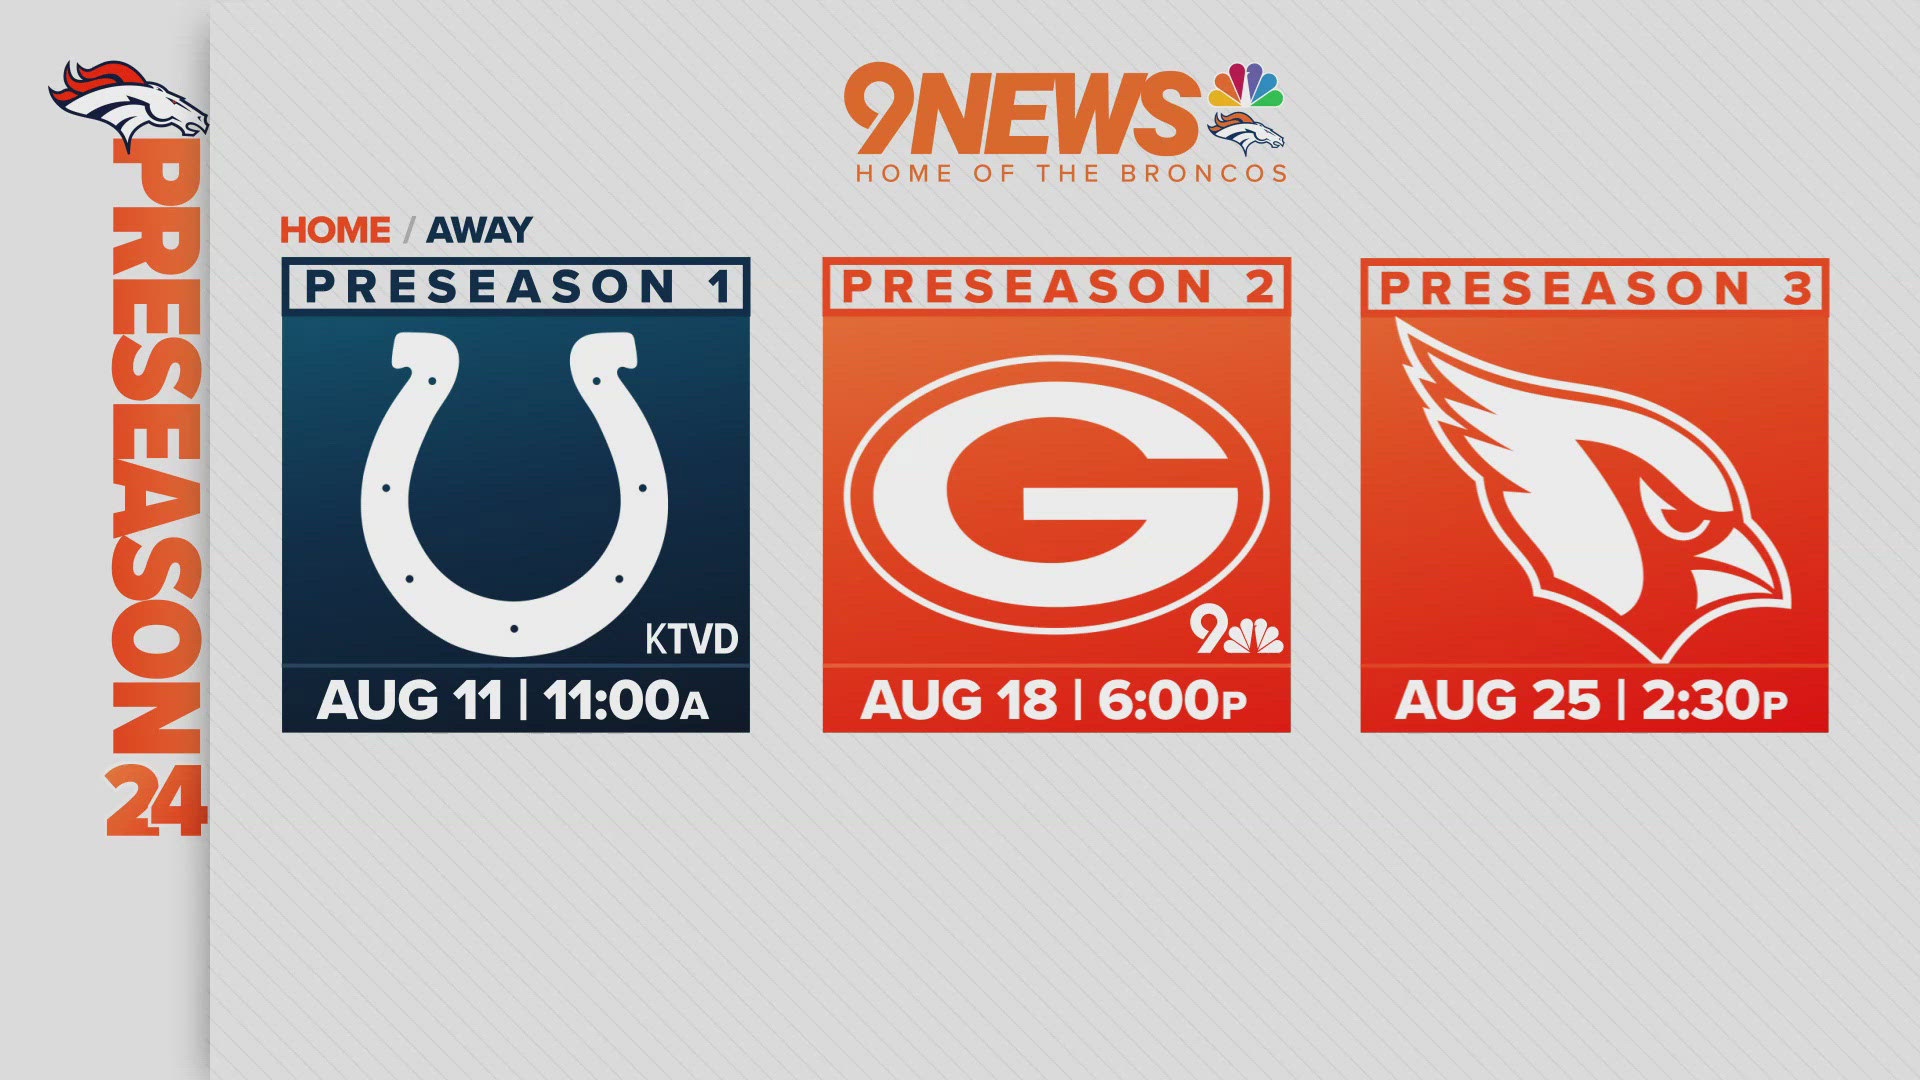 Did you notice the Broncos' preseason schedule? All three games are on Sunday. Usually they are played on Saturdays.